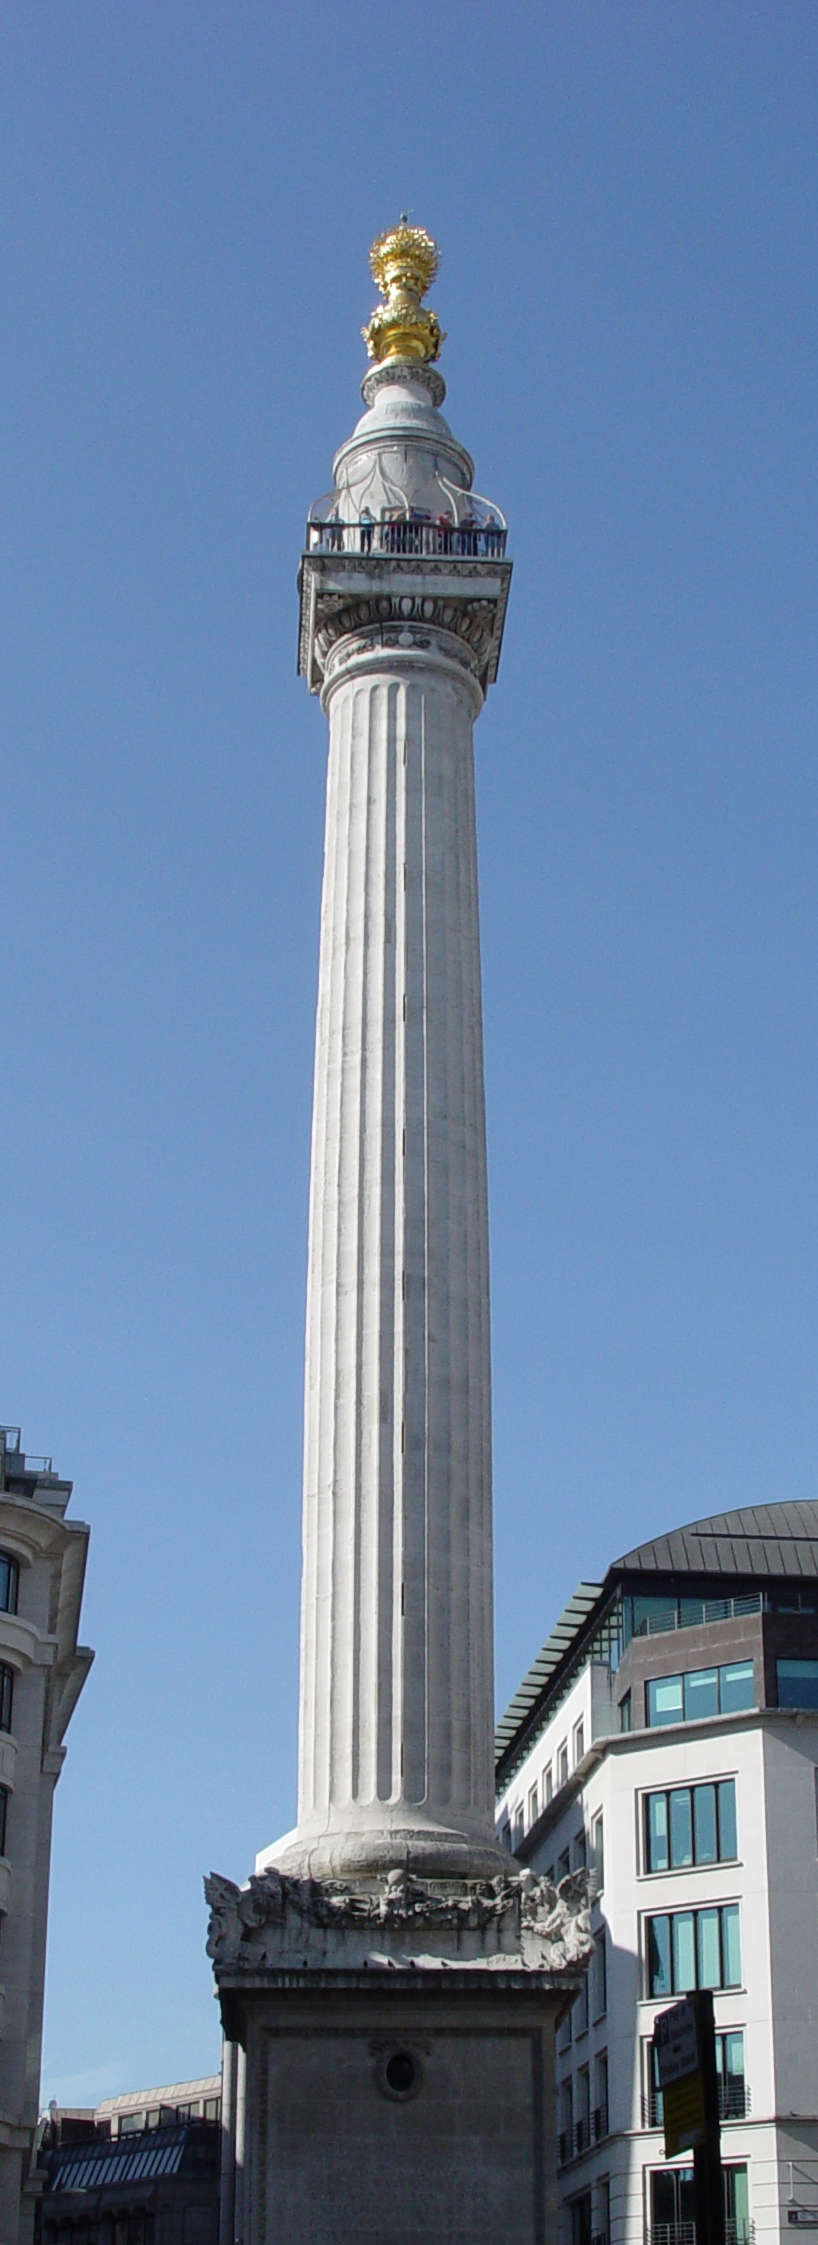 The Monument, where the viewing platform is Pooil Vash.